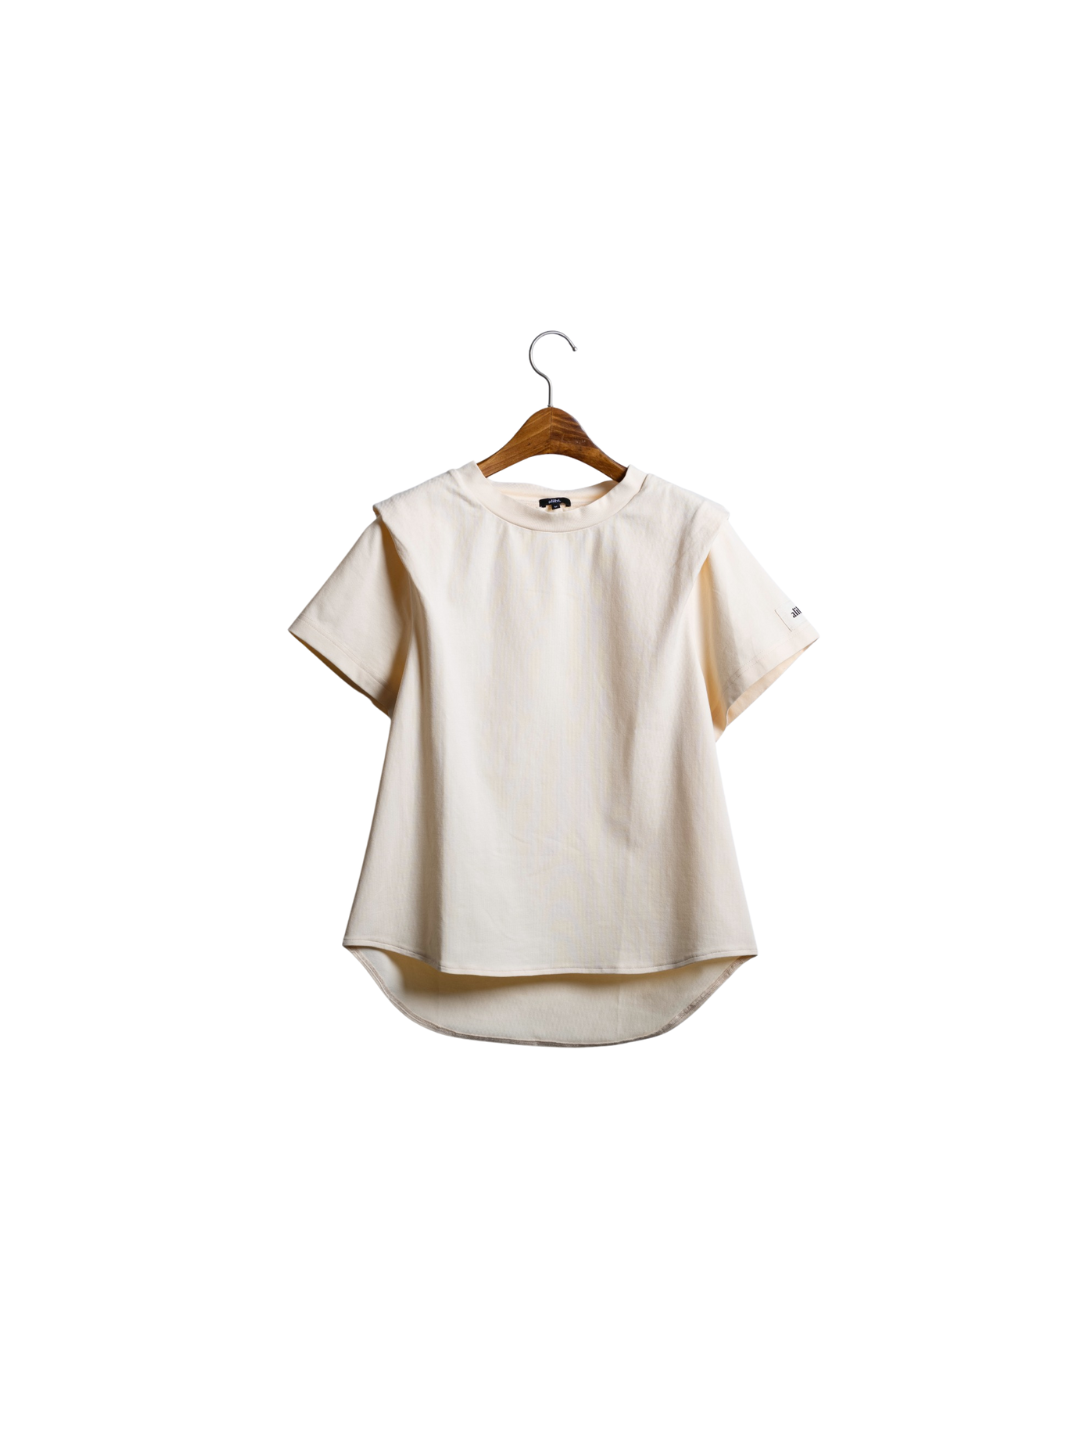 Your essential basic tee; coated in SilvadurTM, making it soft to touch, bacterially-defensive and ecologically sustainable. Ethical eco fashion tee